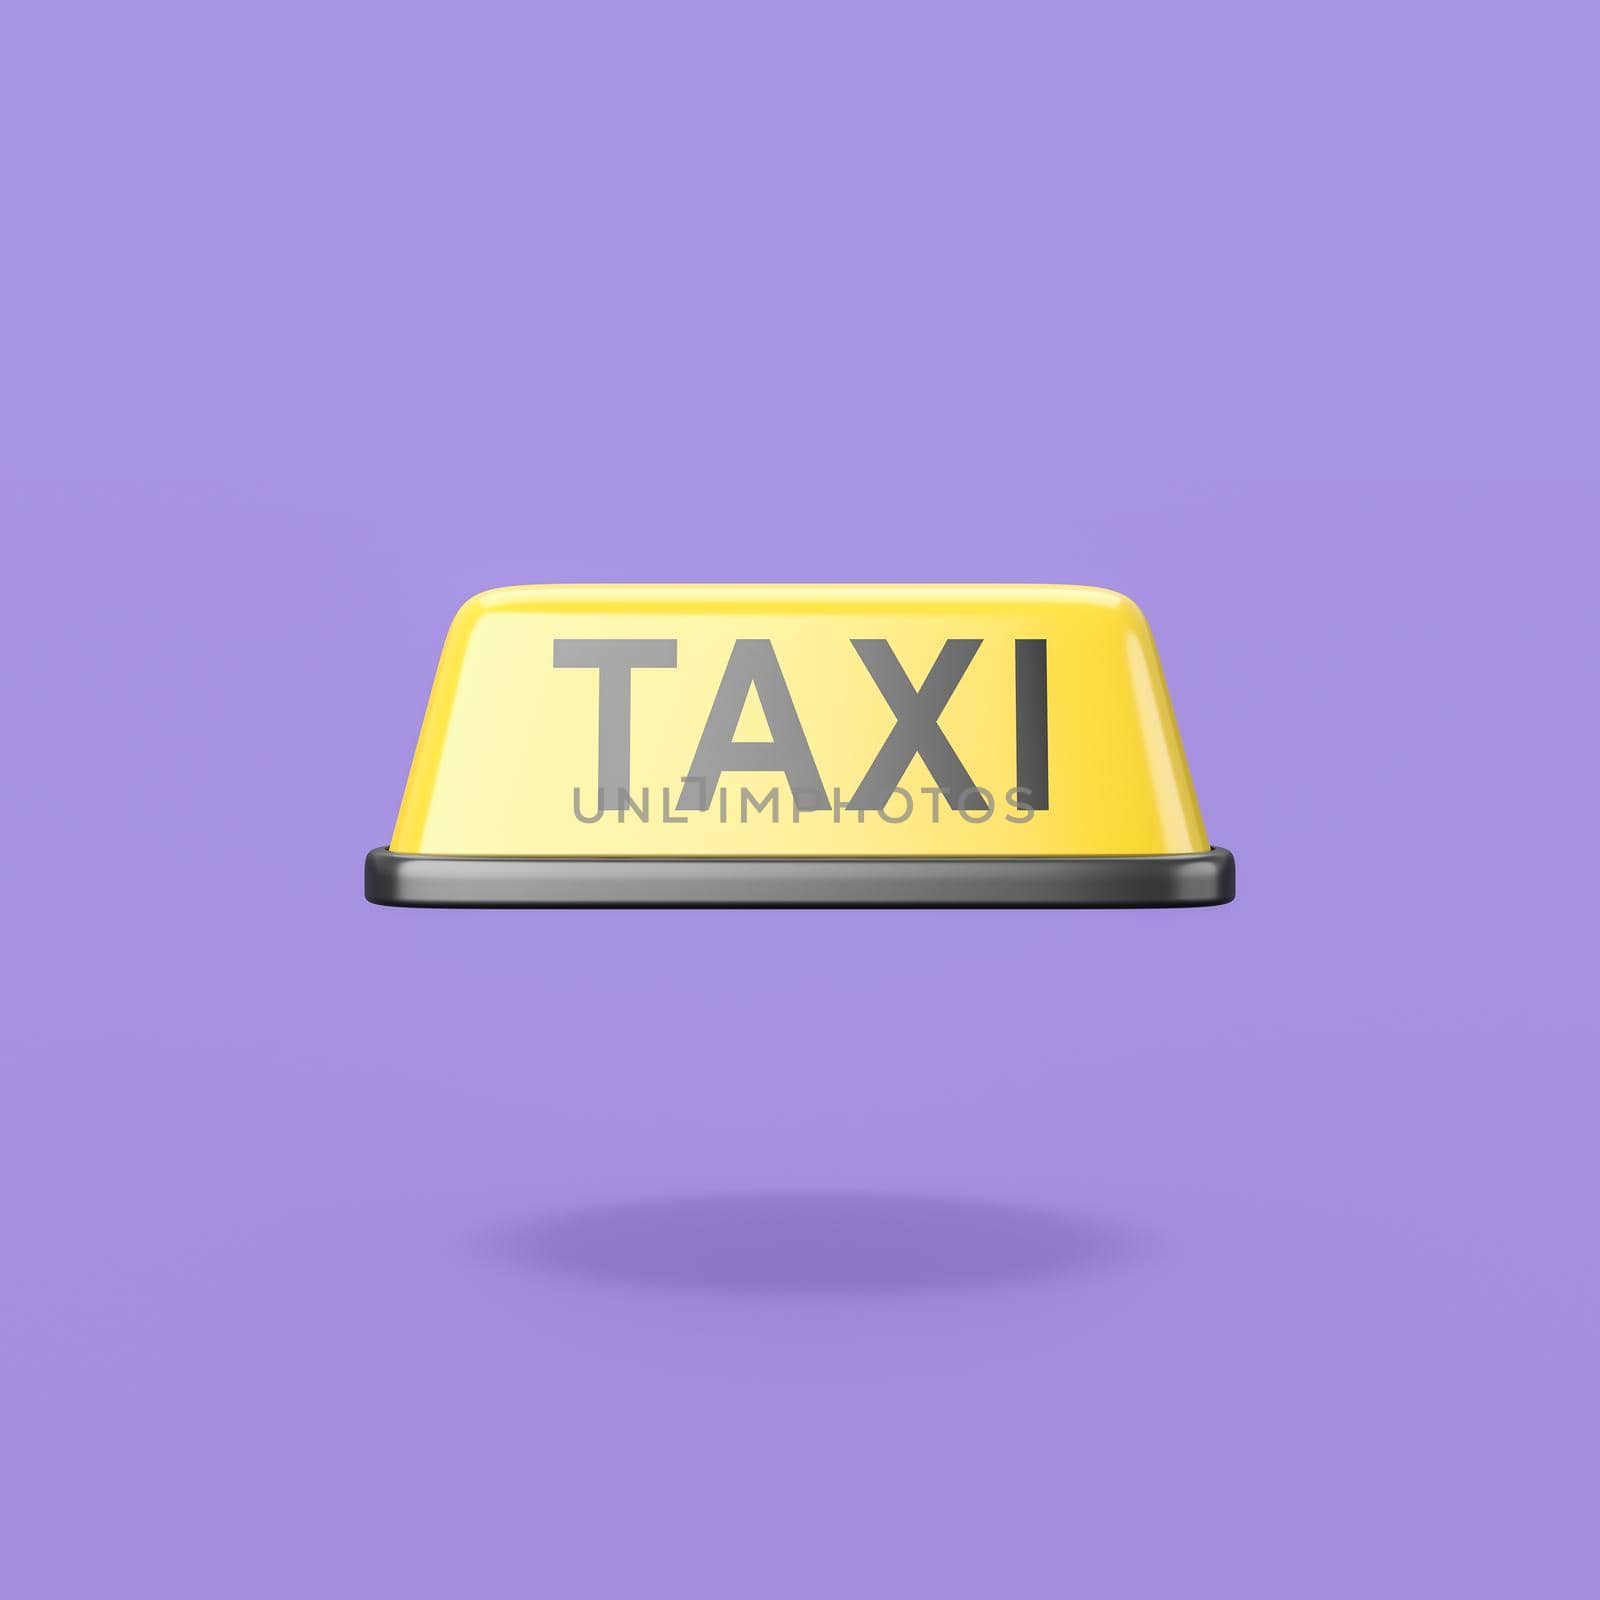 Yellow Taxi Roof Signboard on Purple Background by make